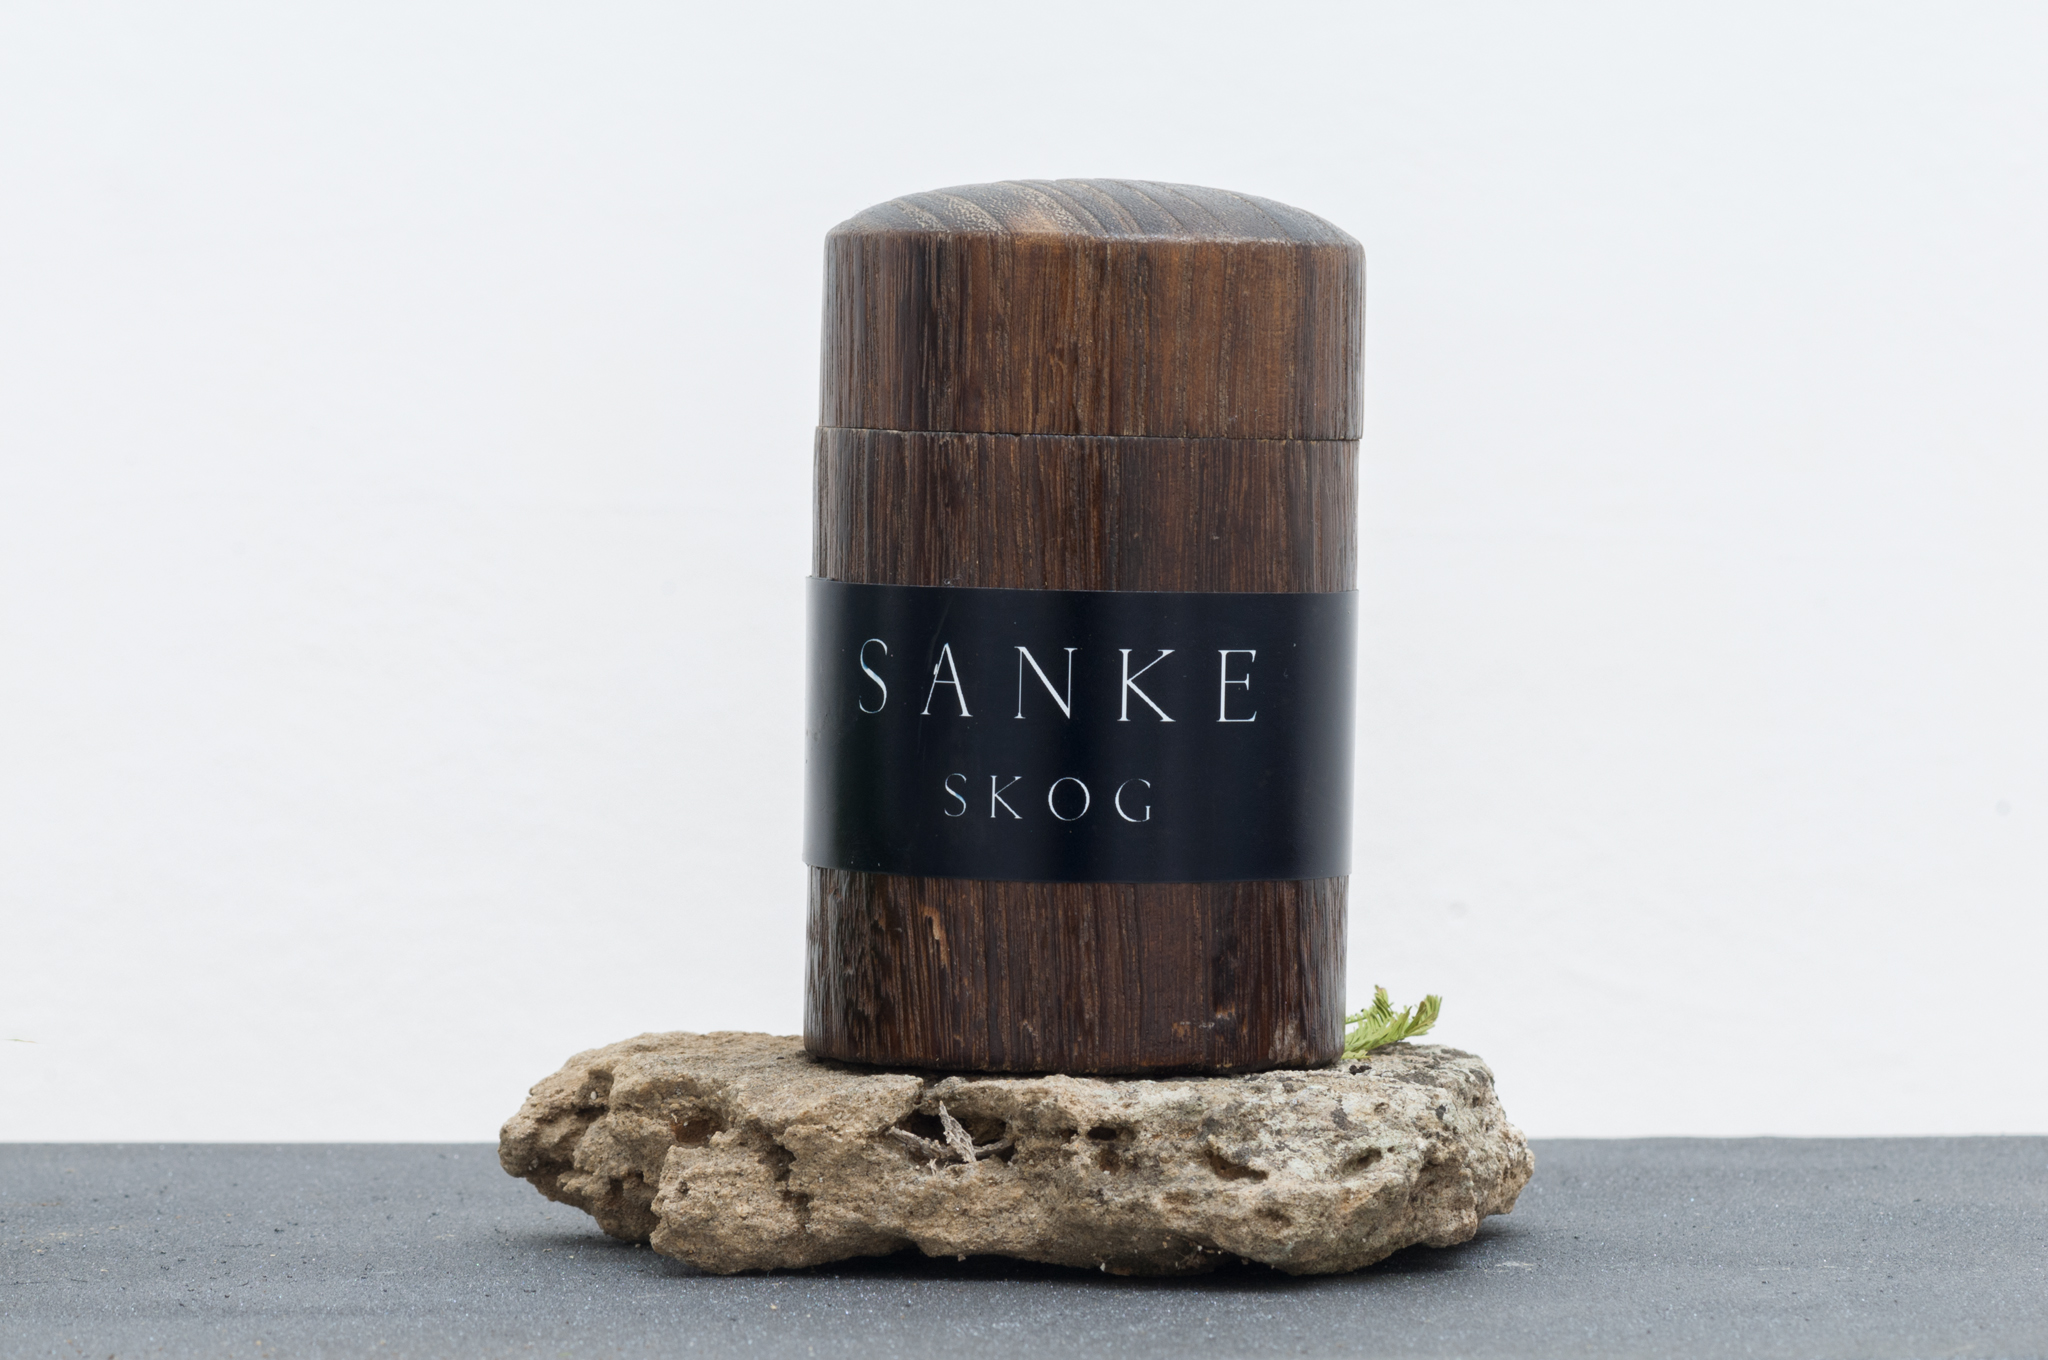 Andreas Ervik, 'S A N K E' (2017). SKOG (infusion of tonic herbs of spruce, Chaga and lichen, box in paulownia wood).